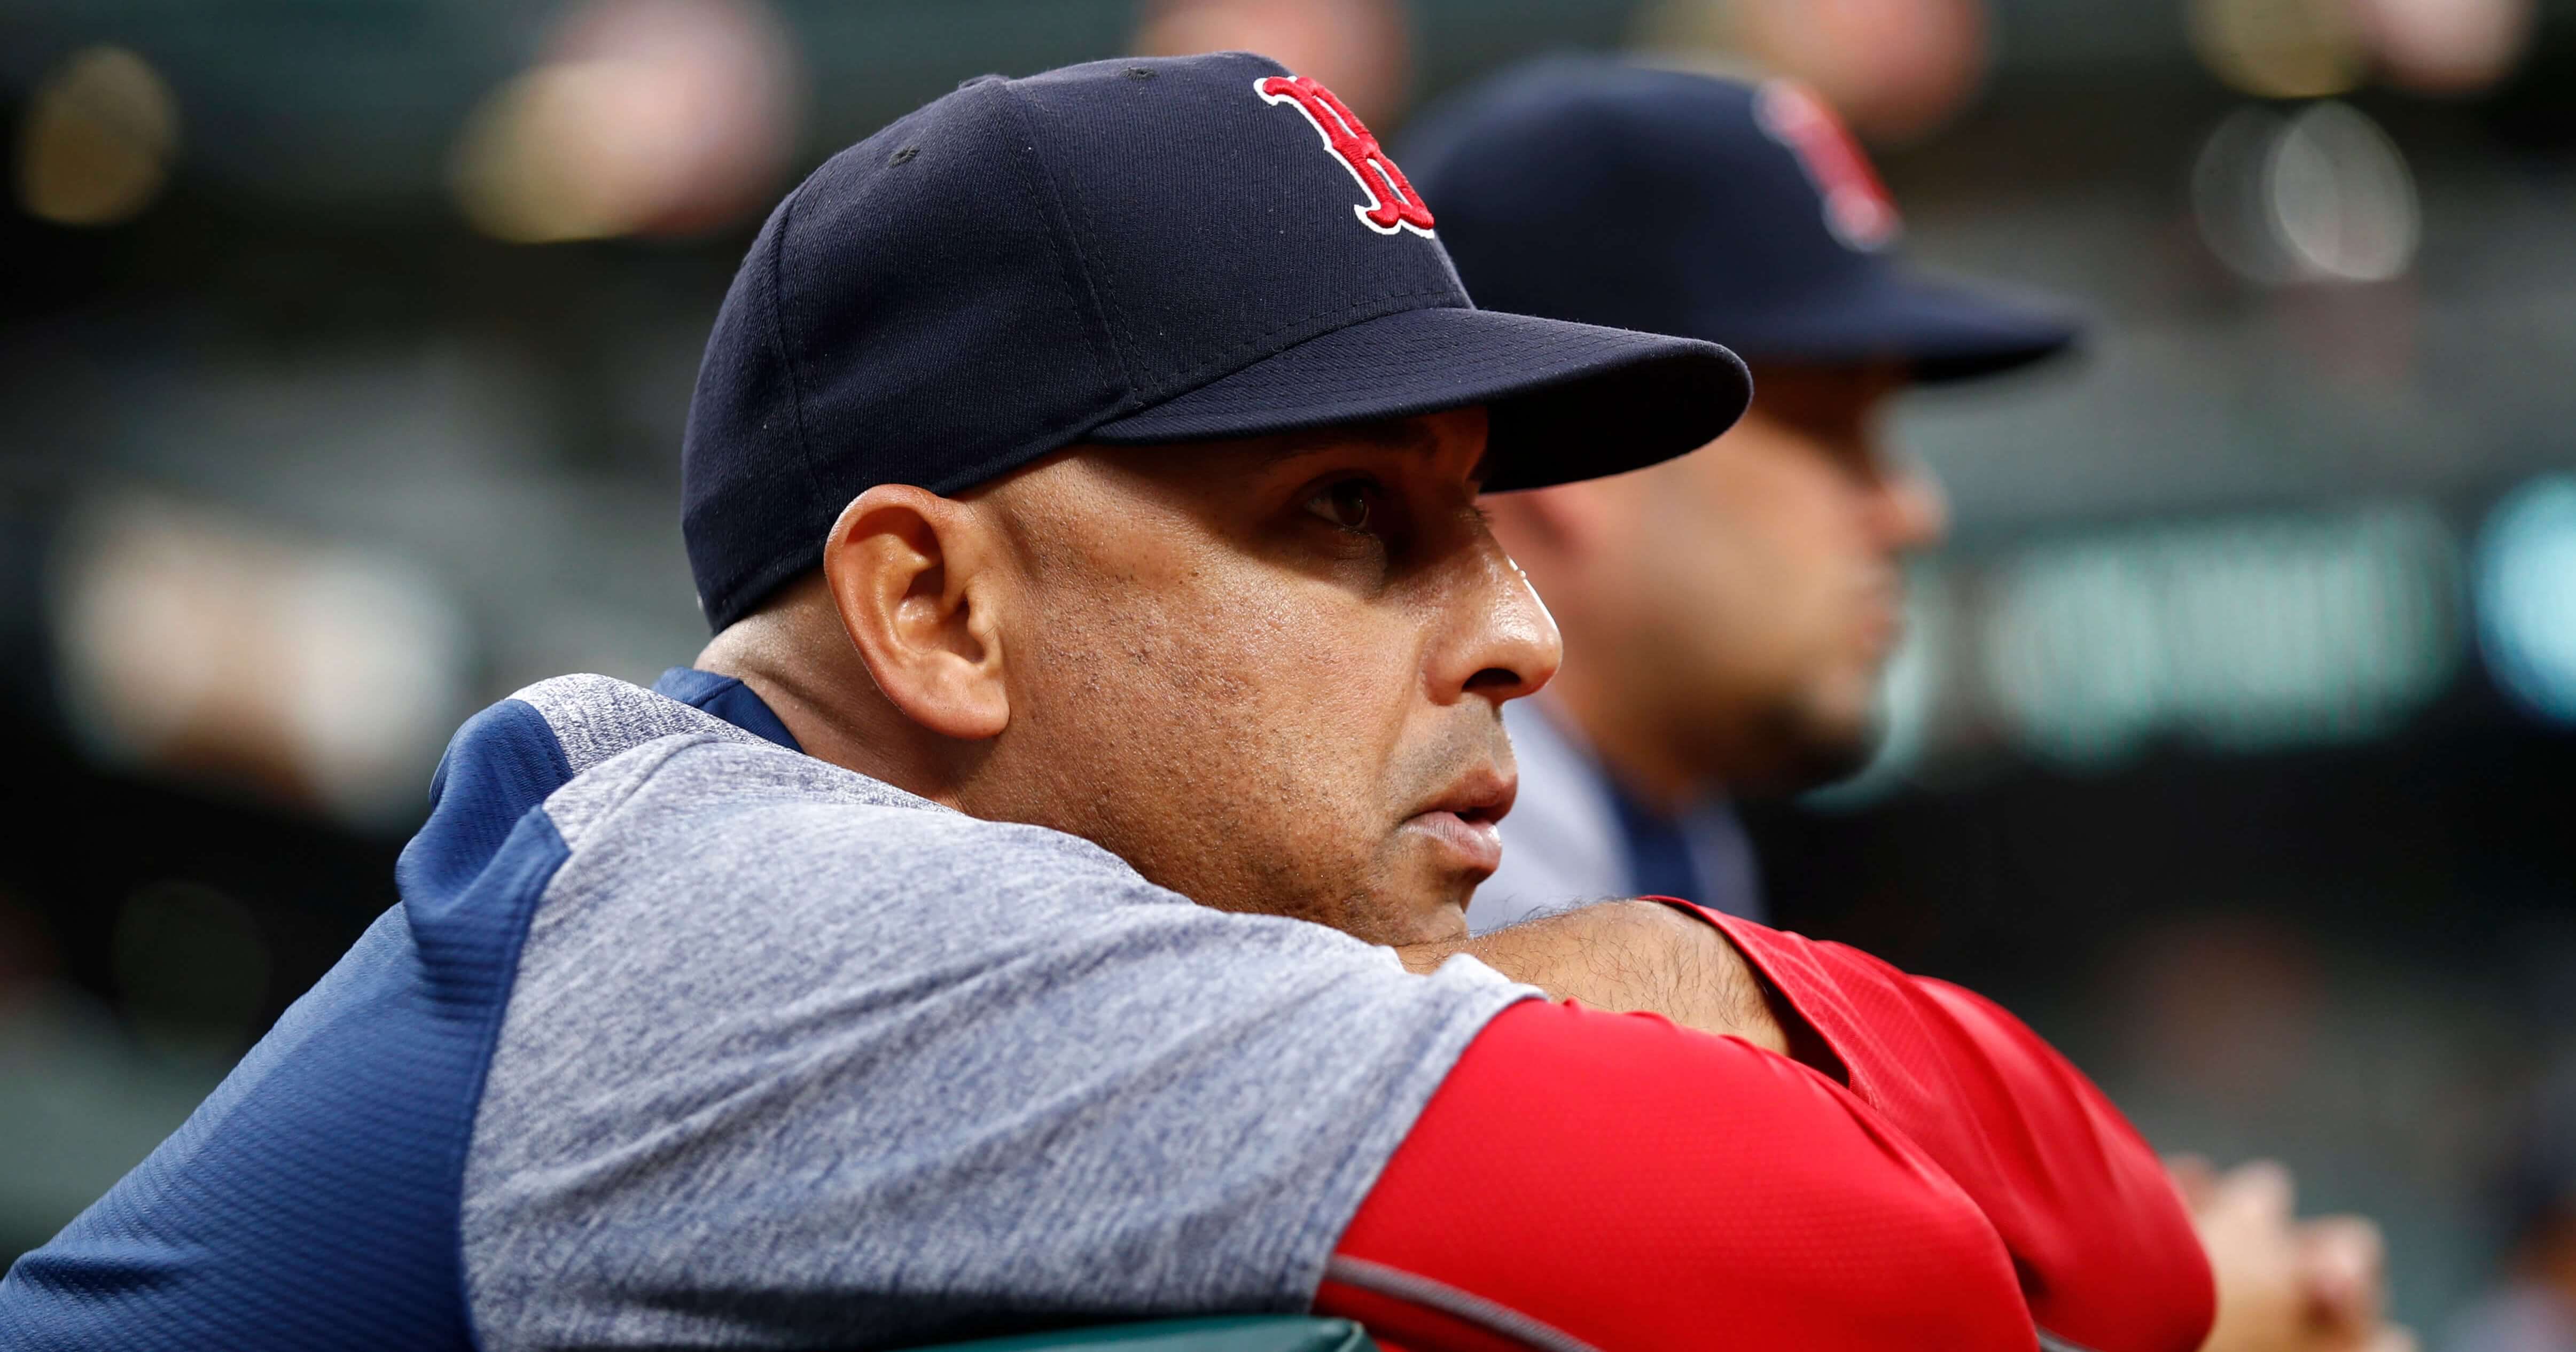 ston Red Sox manager Alex Cora leans against the dugout rail during the second inning of a July game against the Baltimore Orioles.